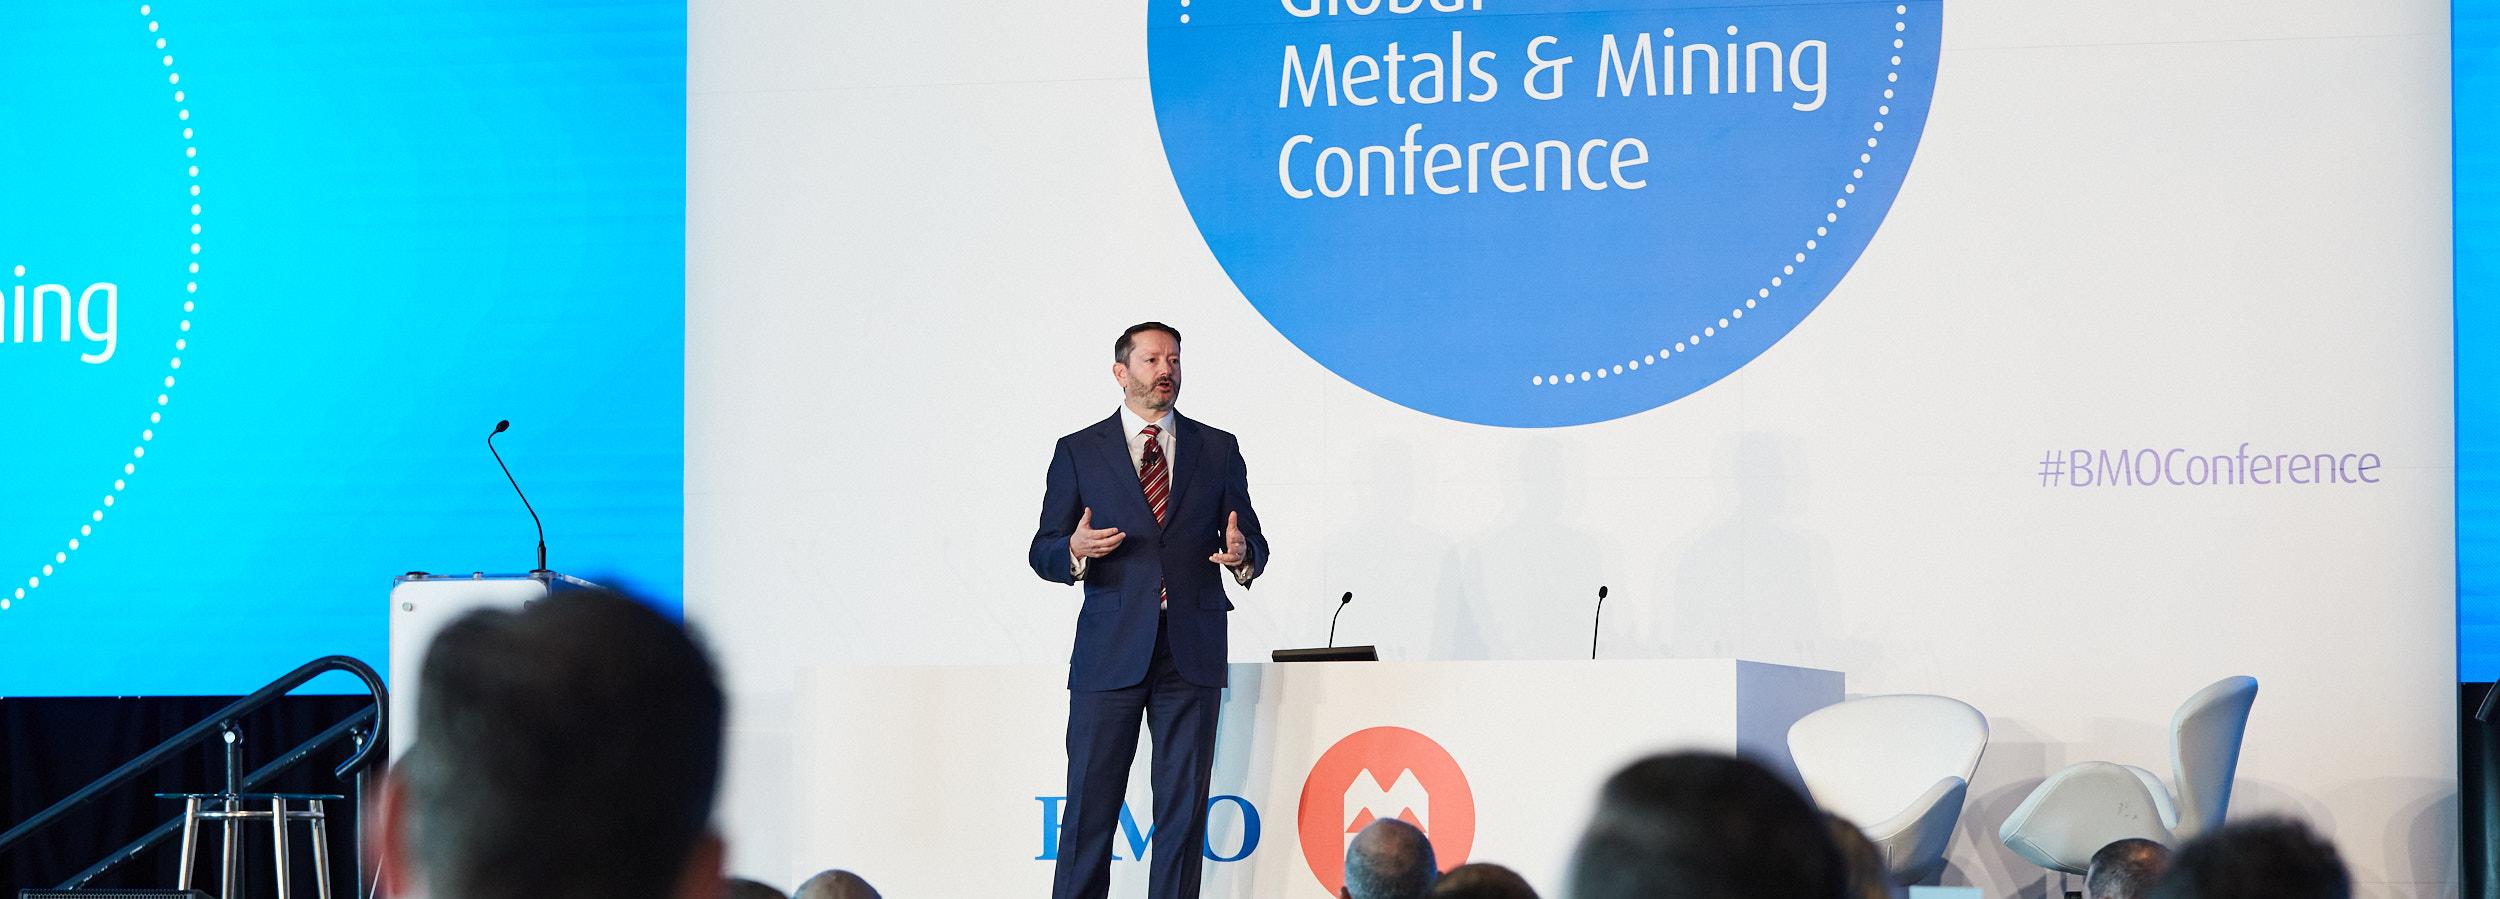 On the ground at the Global Metals & Mining Conference BMO Capital